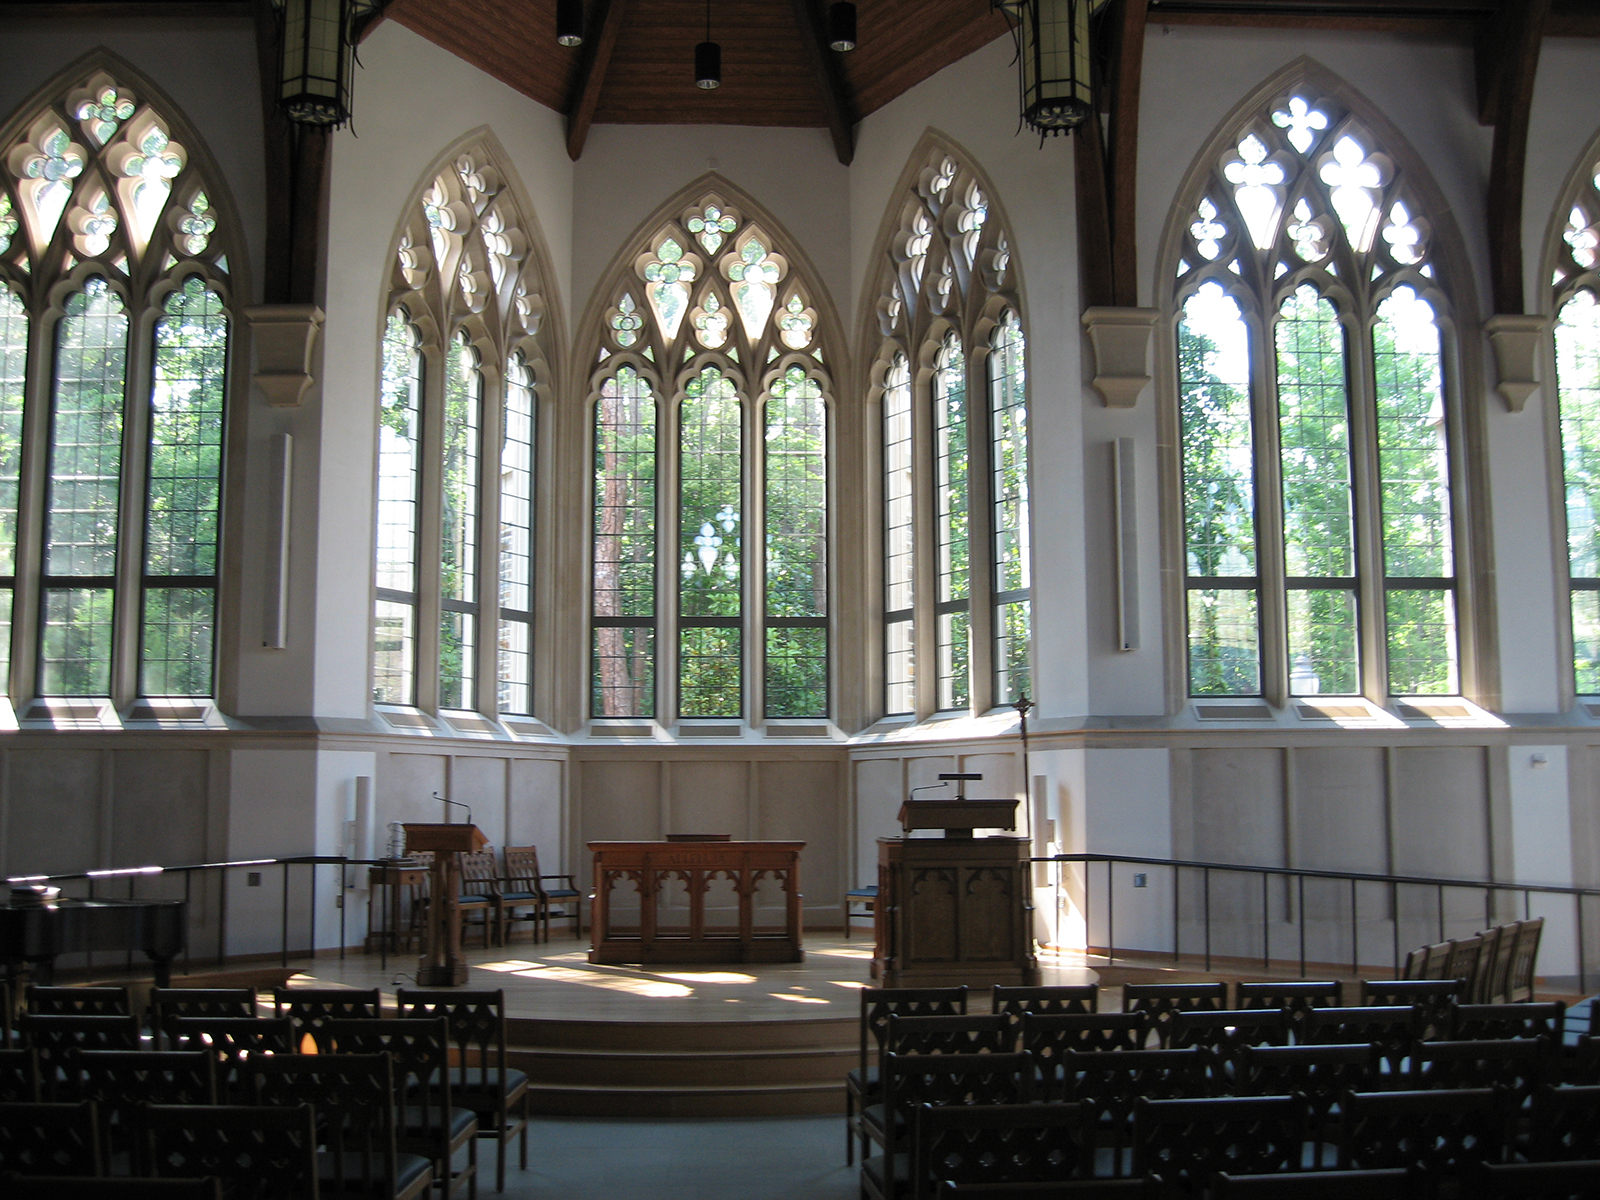 The interior of Goodson Chapel at the Duke Divinity School. Photo by Bluedog423/Creative Commons